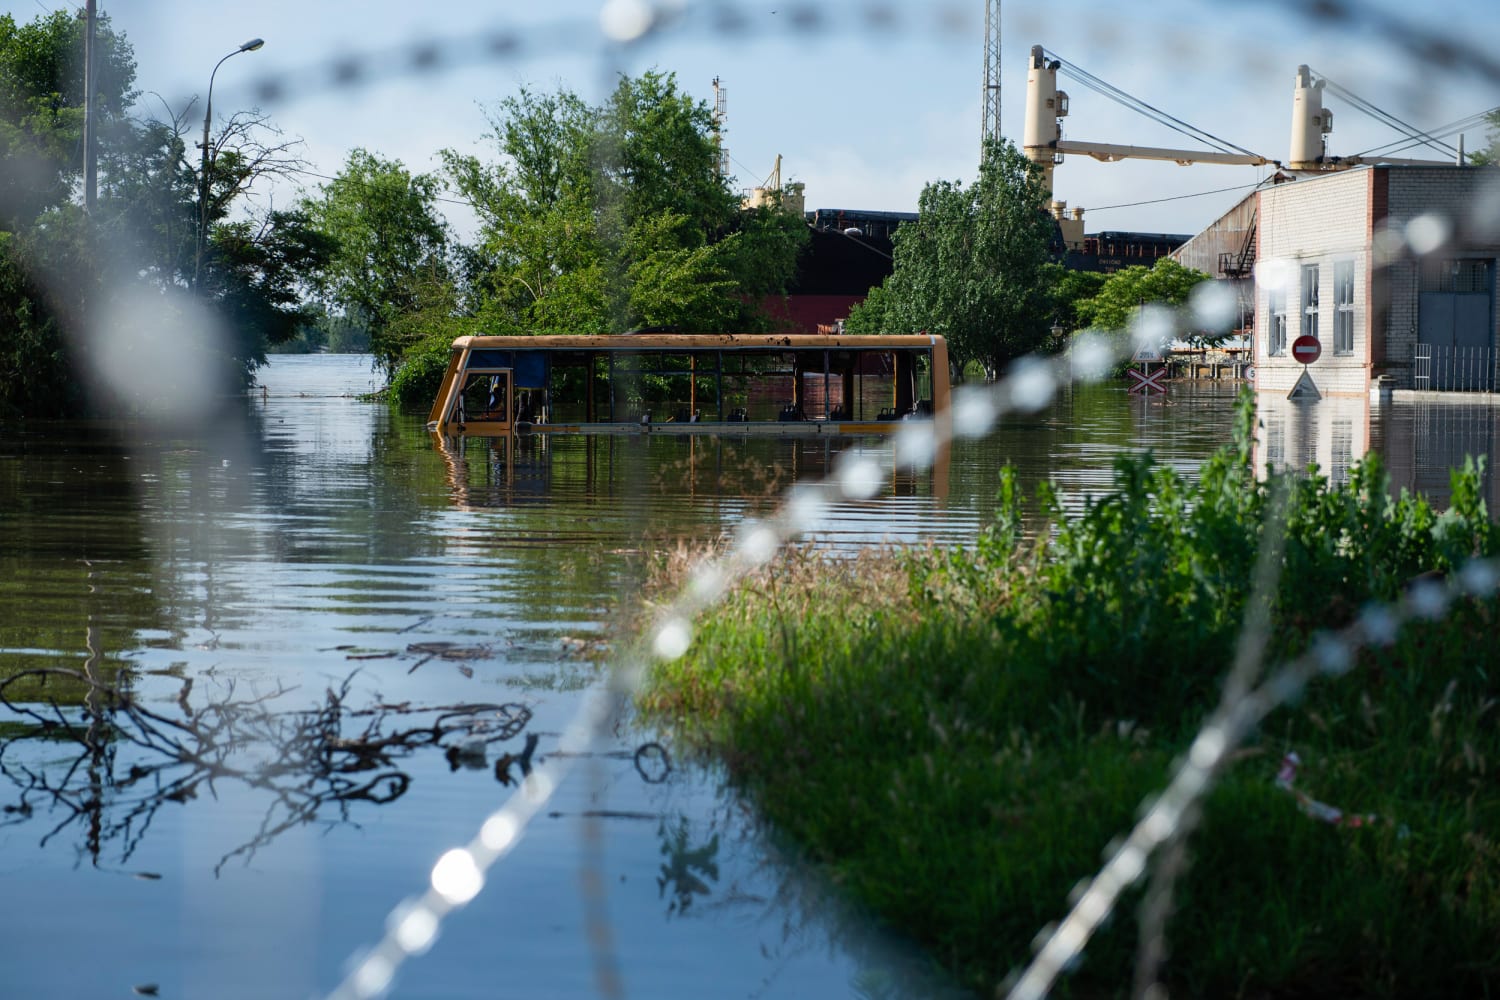 Mines, disease and more: The dangers in Ukraine's floodwaters